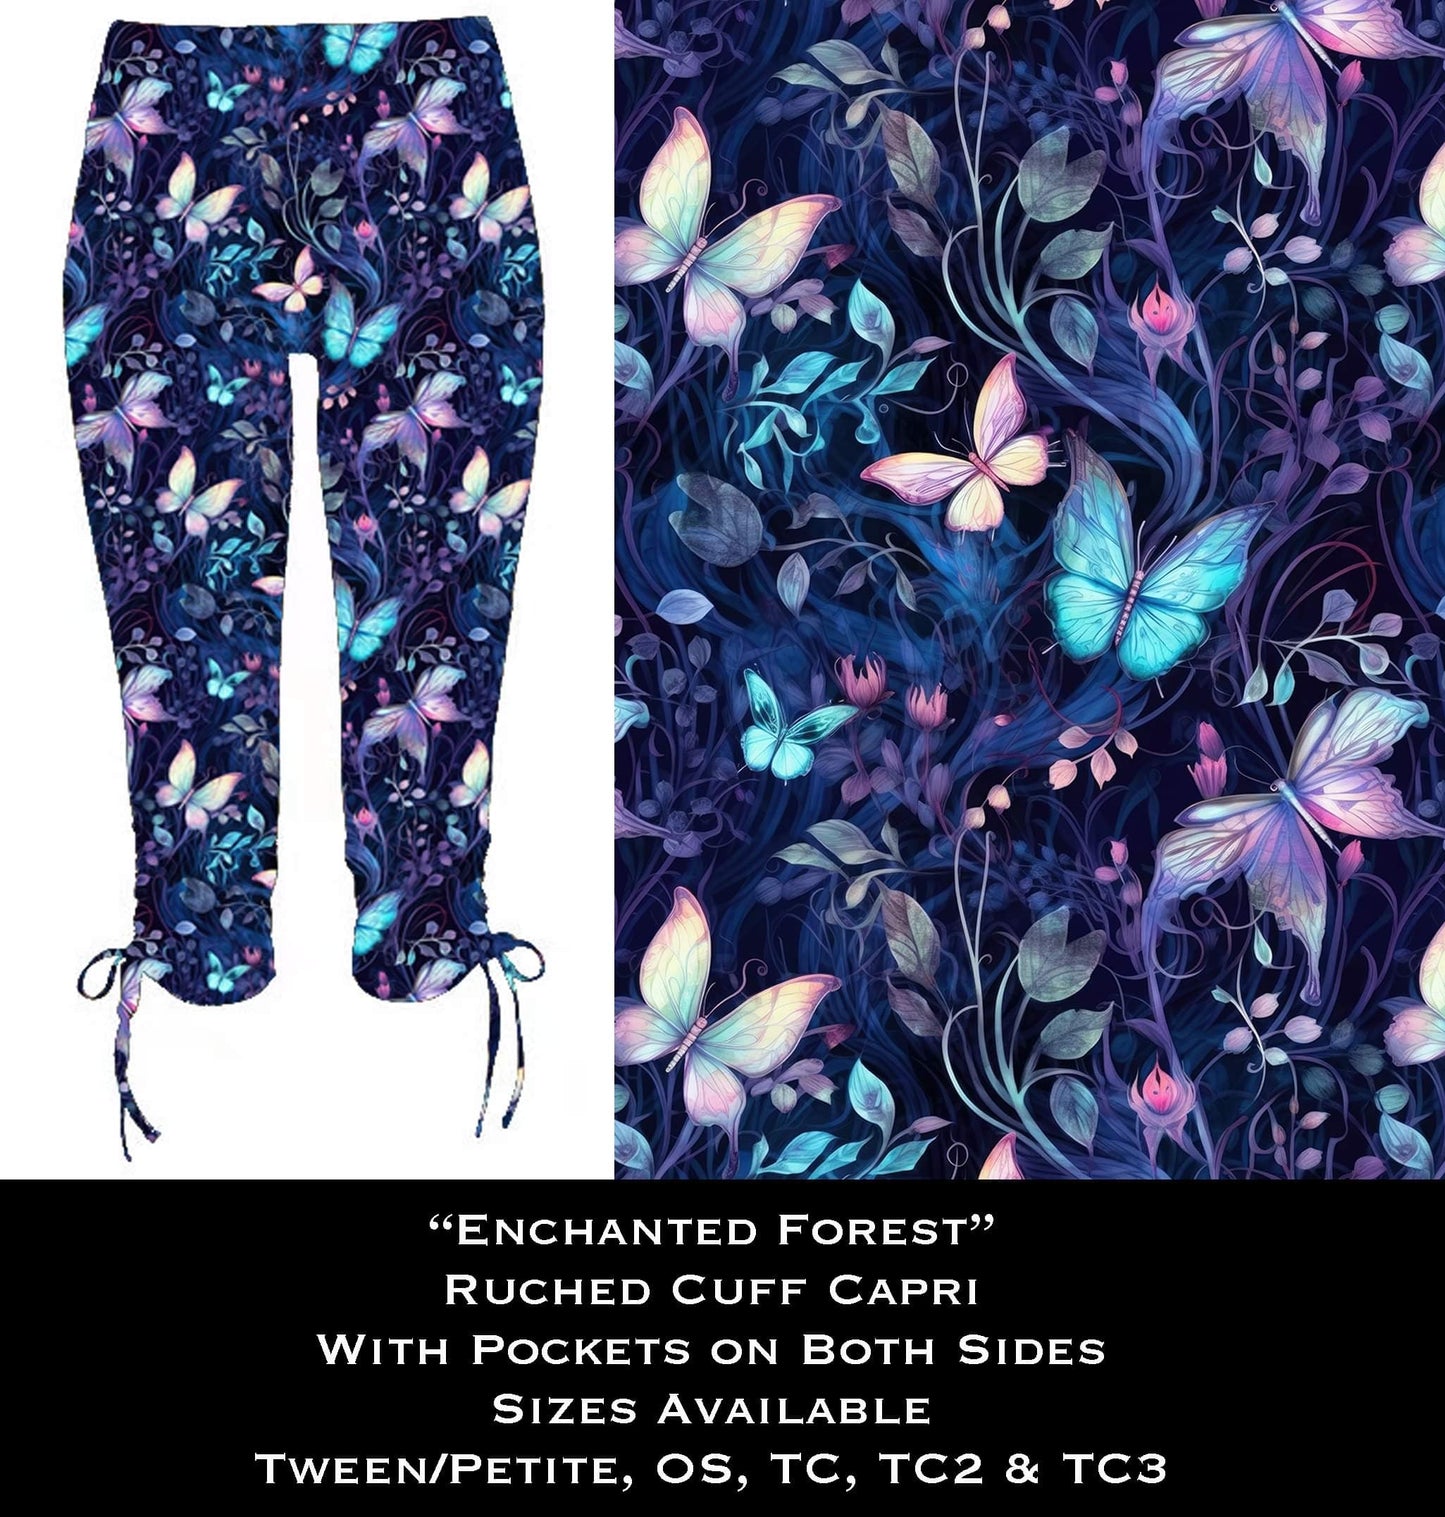 Enchanted Forest Ruched Cuff Capris with Side Pockets